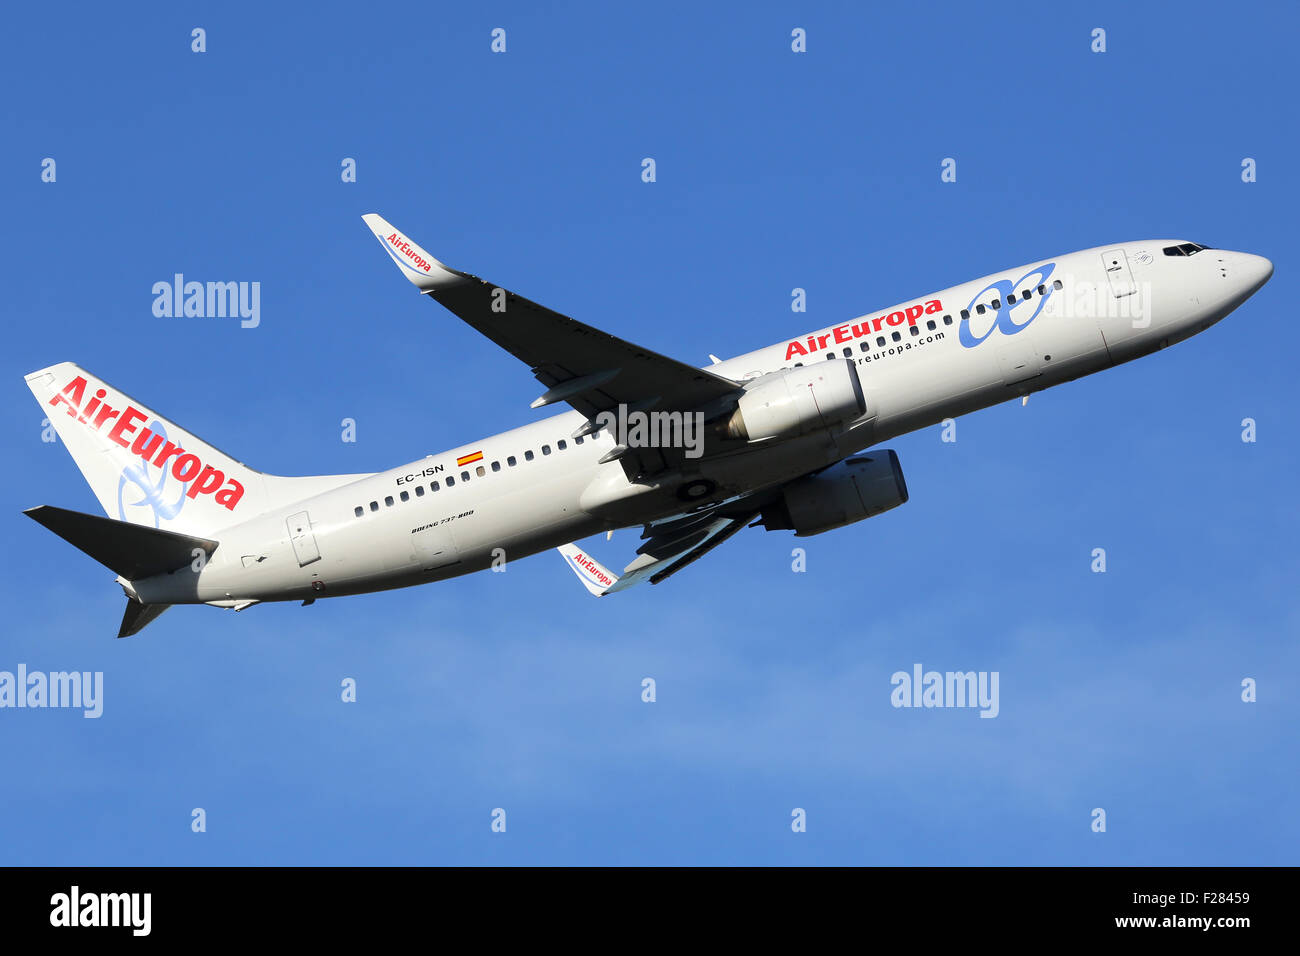 Madrid, Spain - March 5, 2015: An Air Europa Boeing 737-800 aircraft with the registration EC-ISN taking off from Madrid Barajas Stock Photo